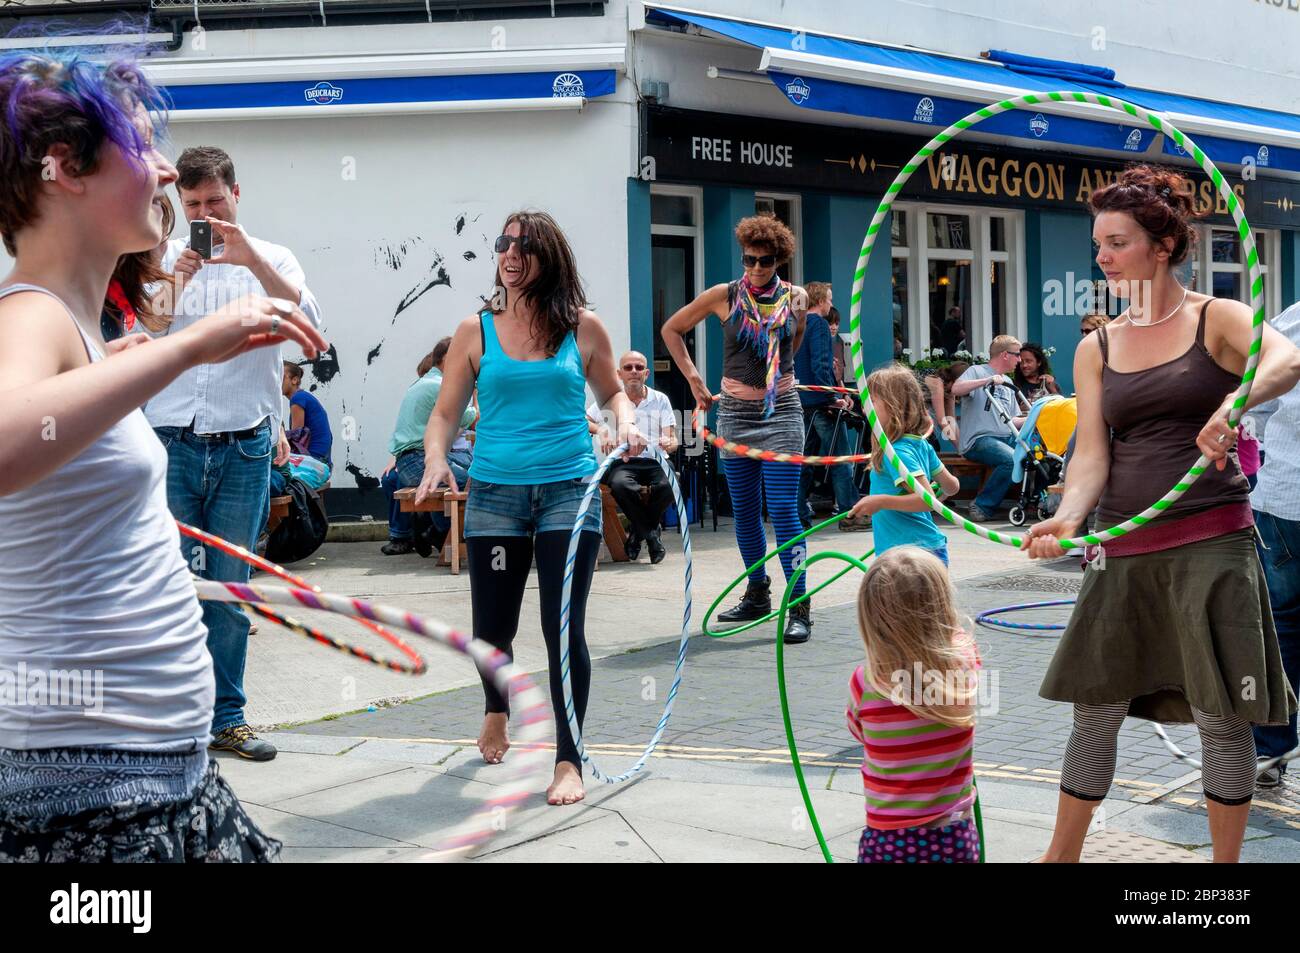 Women and young girls playing with hula hoops in the crowded streets during the Brighton Festival 2012 in Brighton, United Kingdom Stock Photo